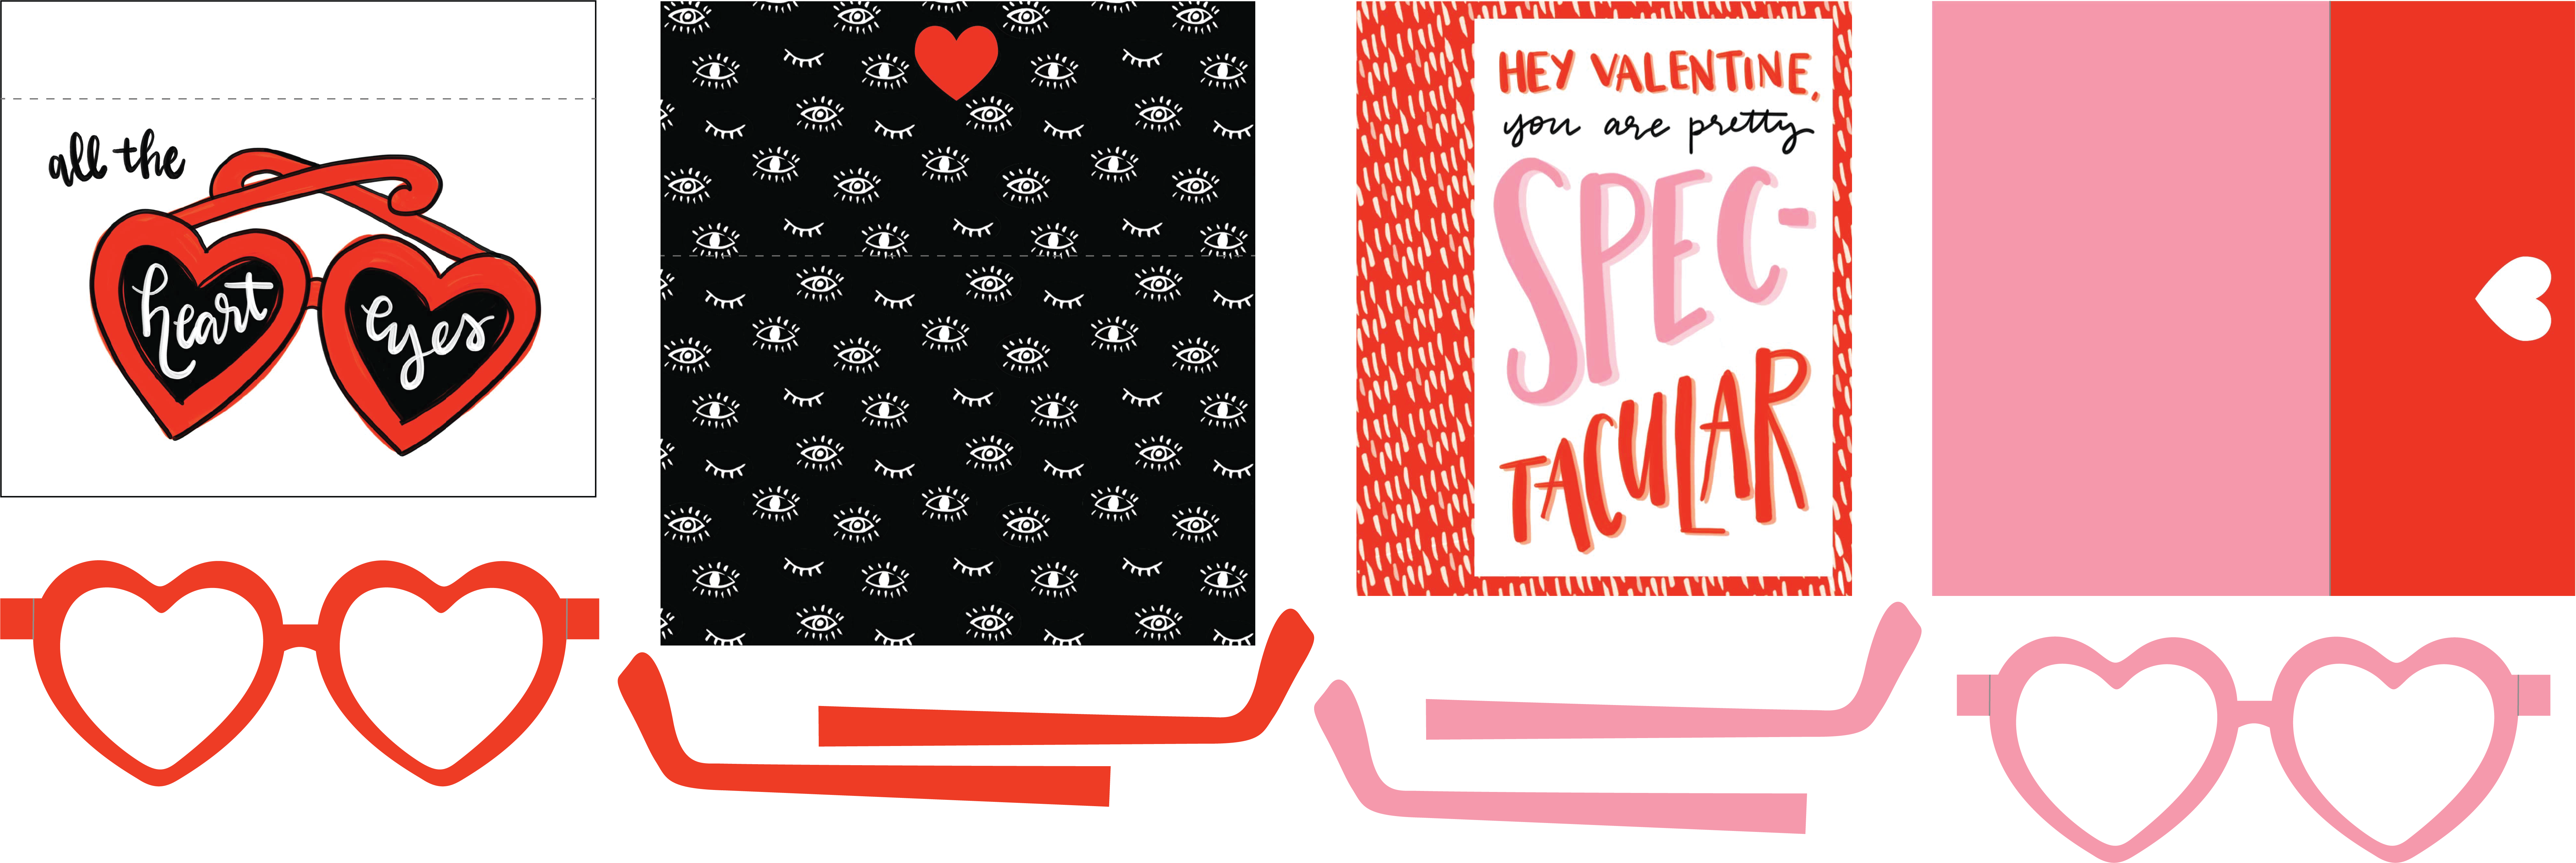 Printable Valentine Cards With Heart Glasses Supplies - Printable Valentine Cards With Heart Glasses Supplies (7796x2611)